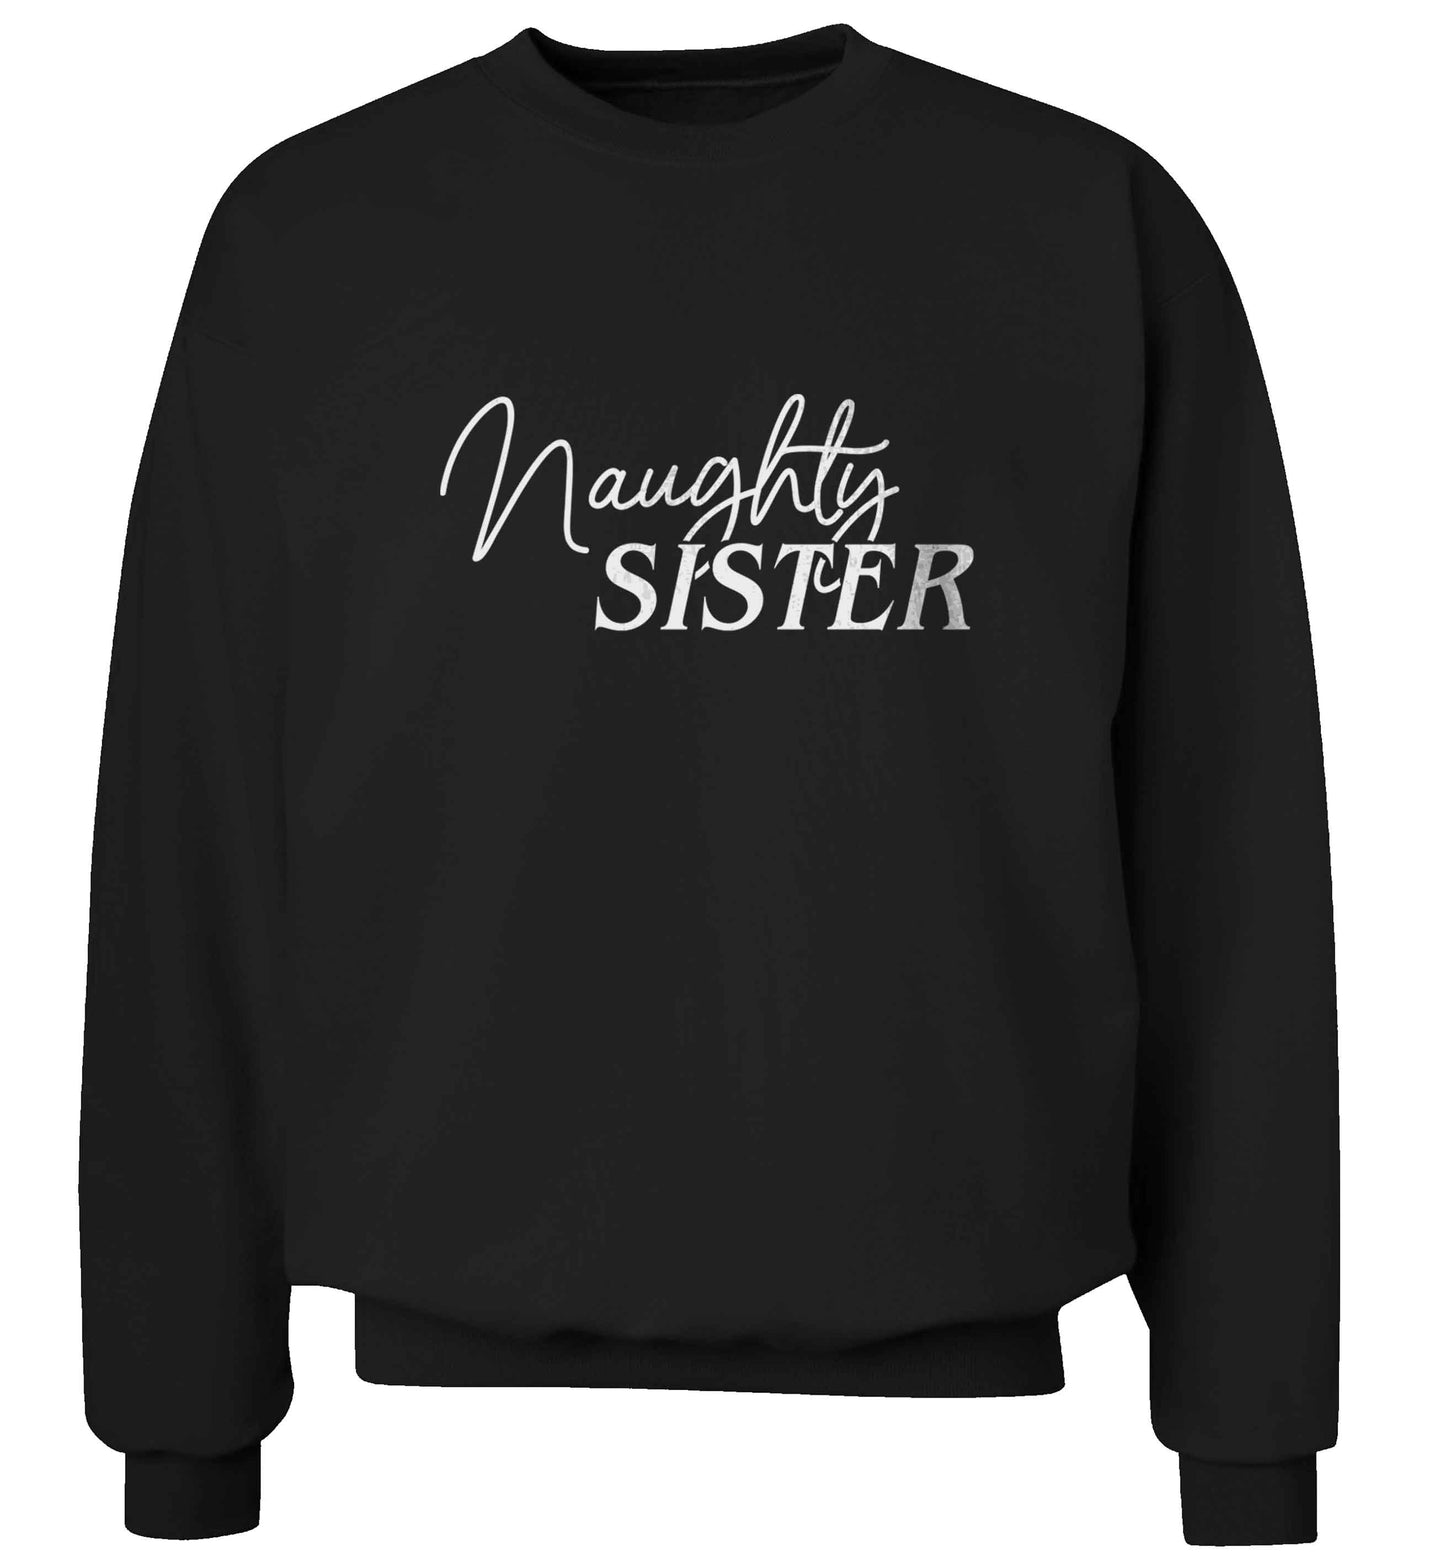 Naughty Sister adult's unisex black sweater 2XL